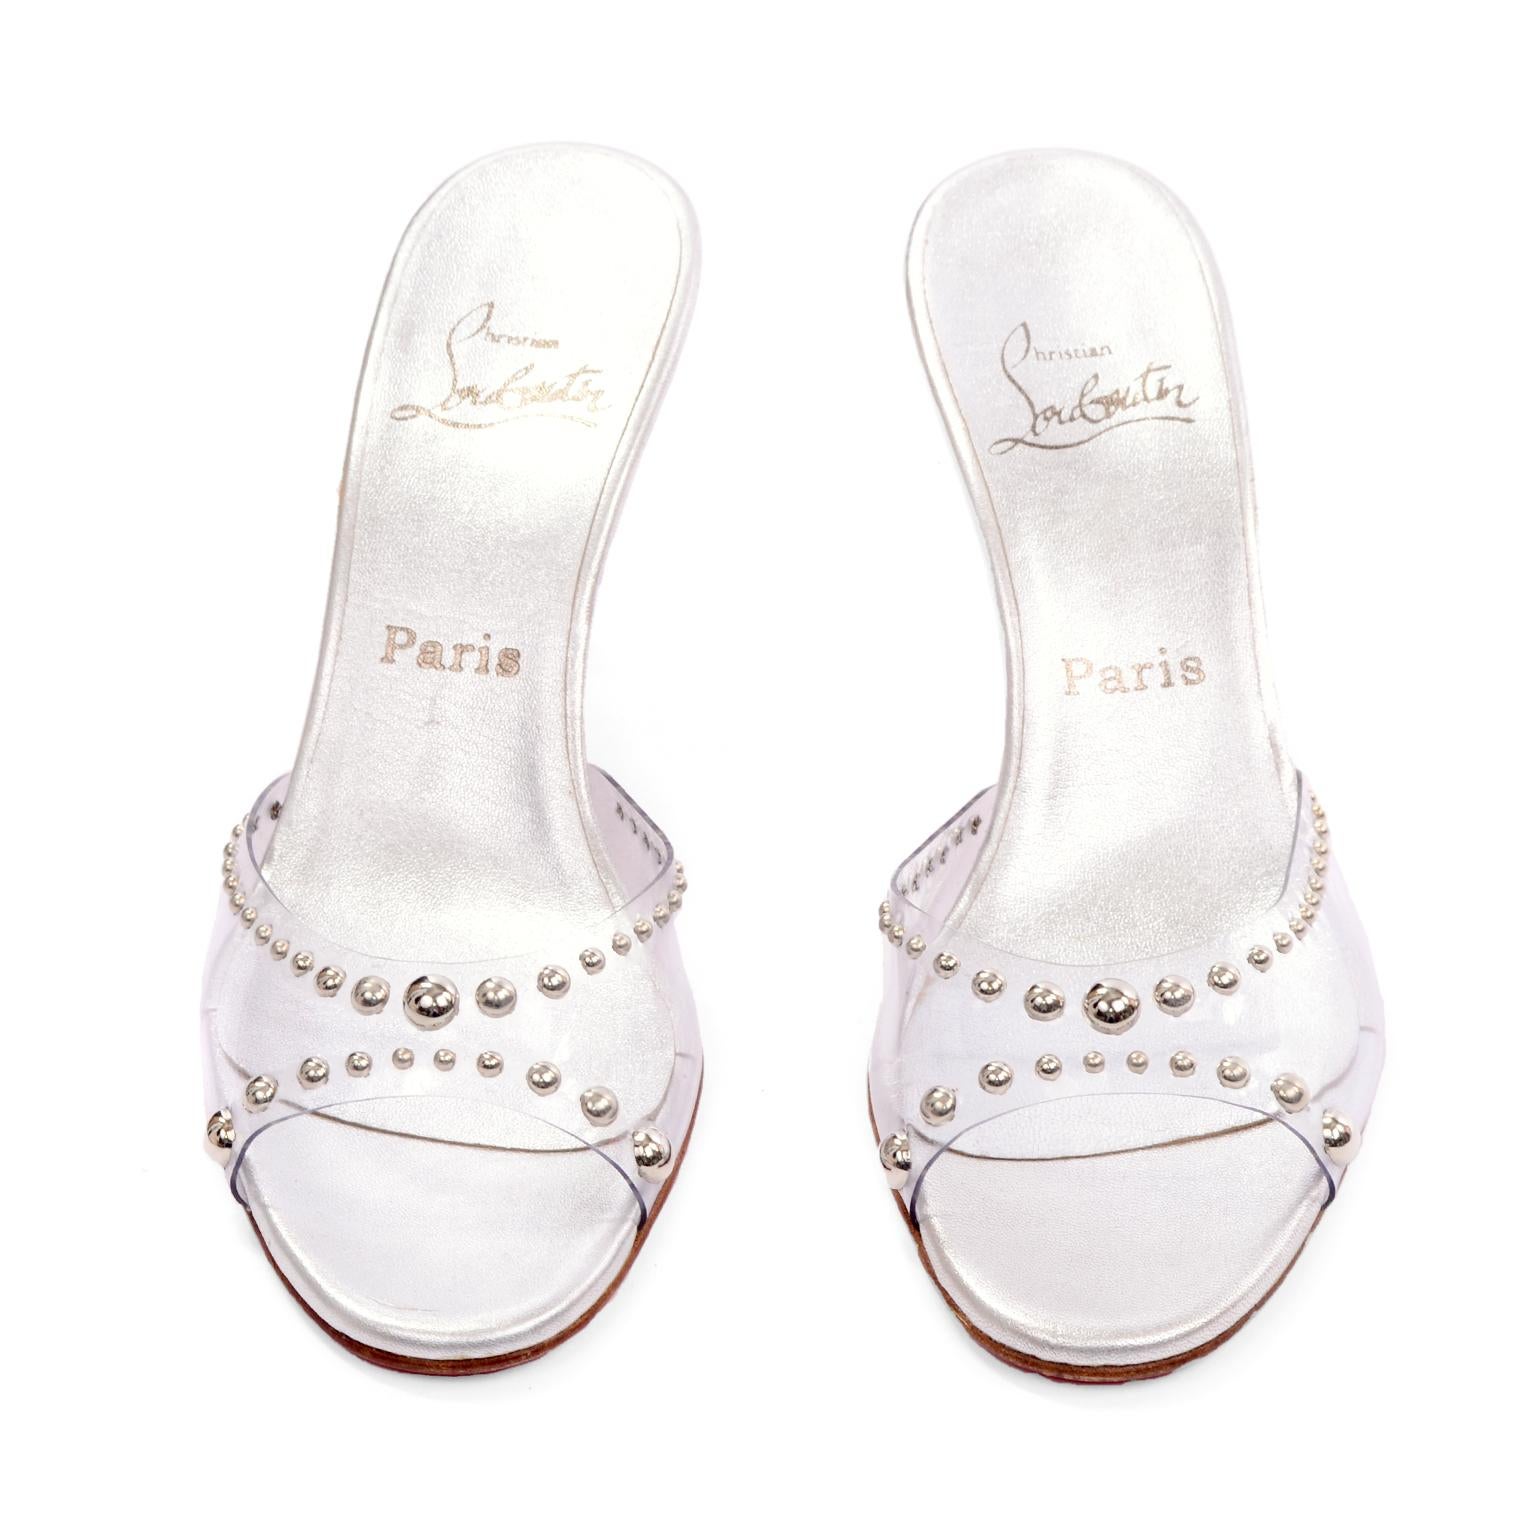 These are wonderful Christian Louboutin heels with pvc clear uppers embellished with silver round studs that were never worn. These open toe slides have 3 inch heels and a silver metallic insole. The classic Louboutin red soles are in beautiful